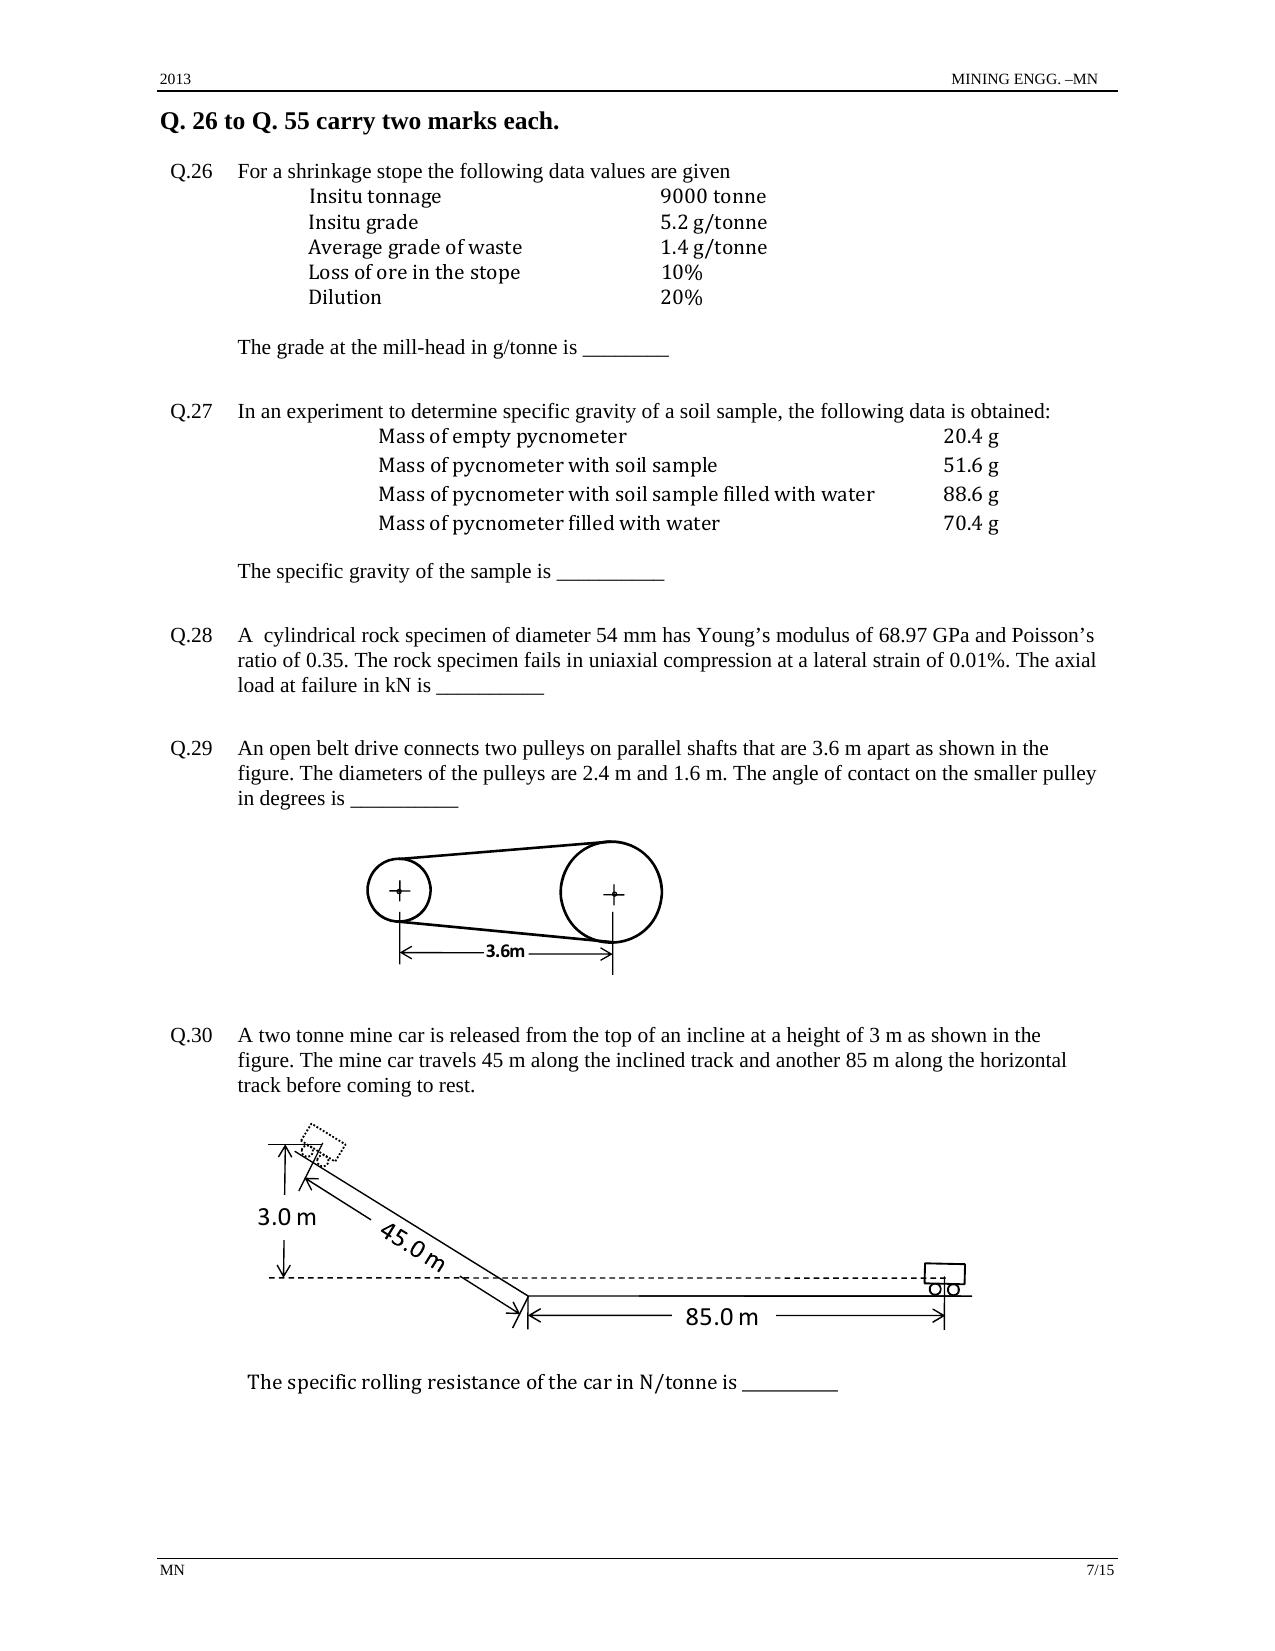 GATE 2013 Mining Engineering (MN) Question Paper with Answer Key - Page 7